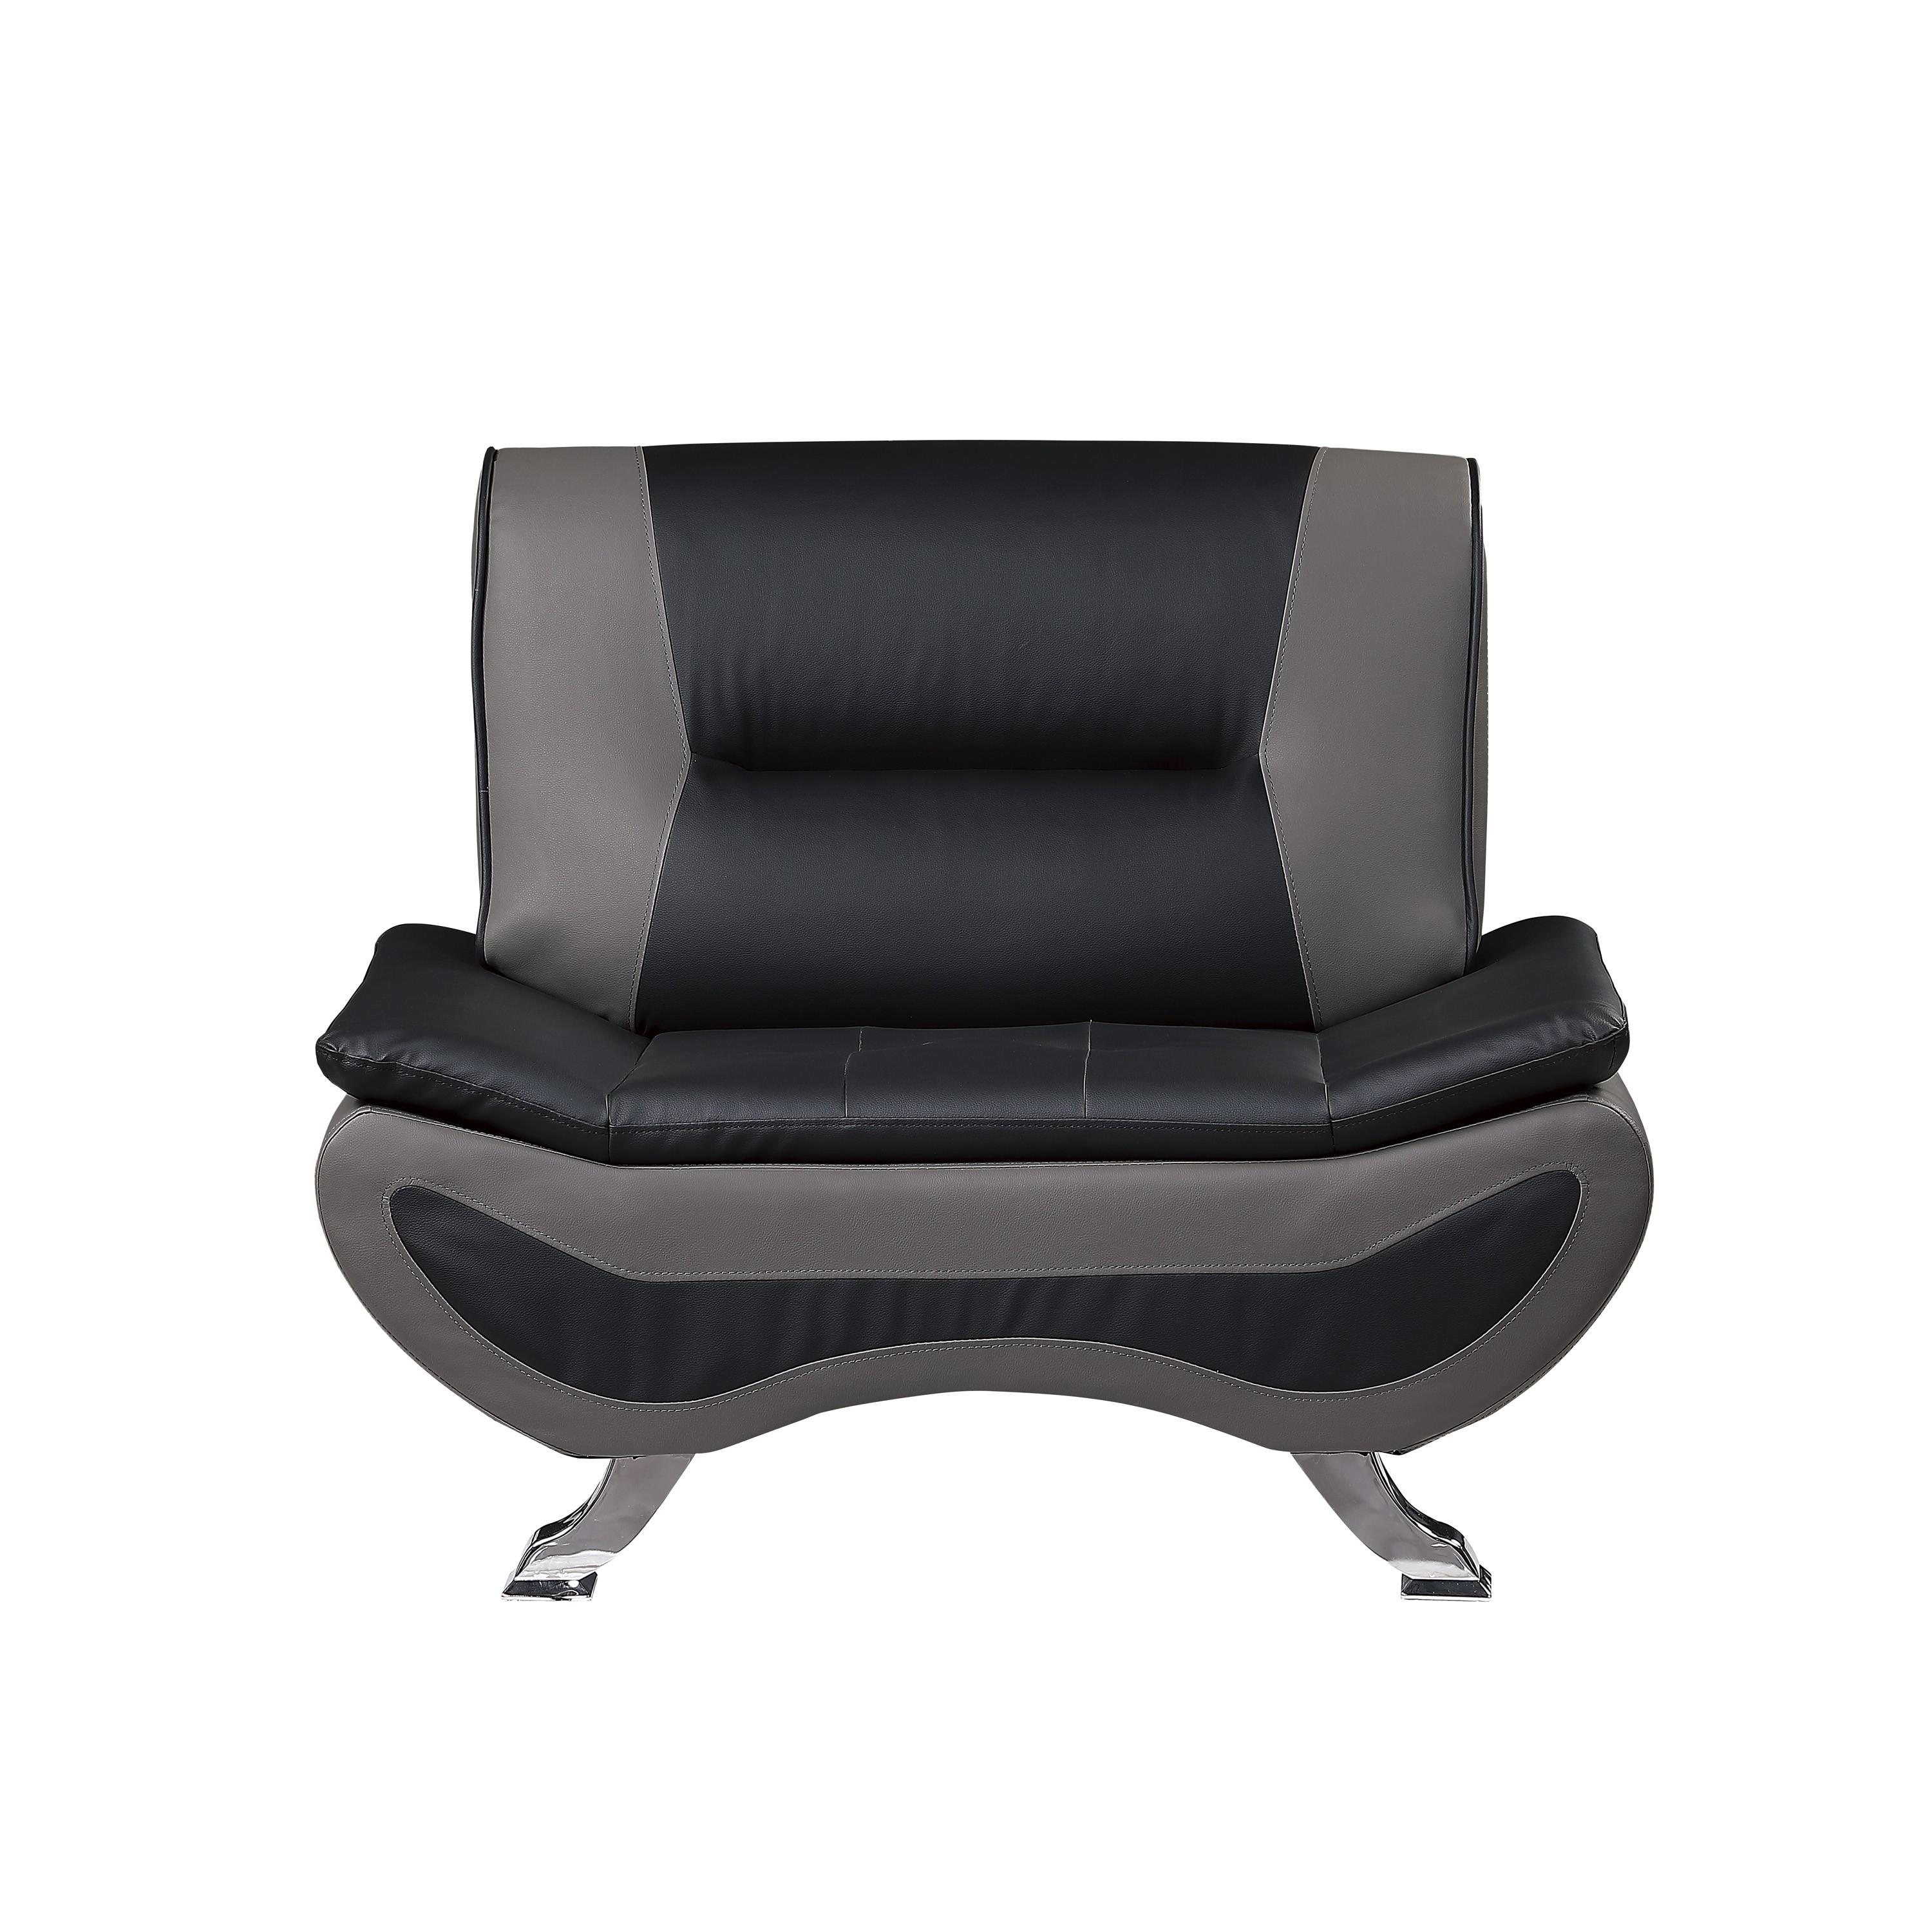 Contemporary Arm Chair 8219BLK-1 Veloce 8219BLK-1 in Gray, Black Faux Leather